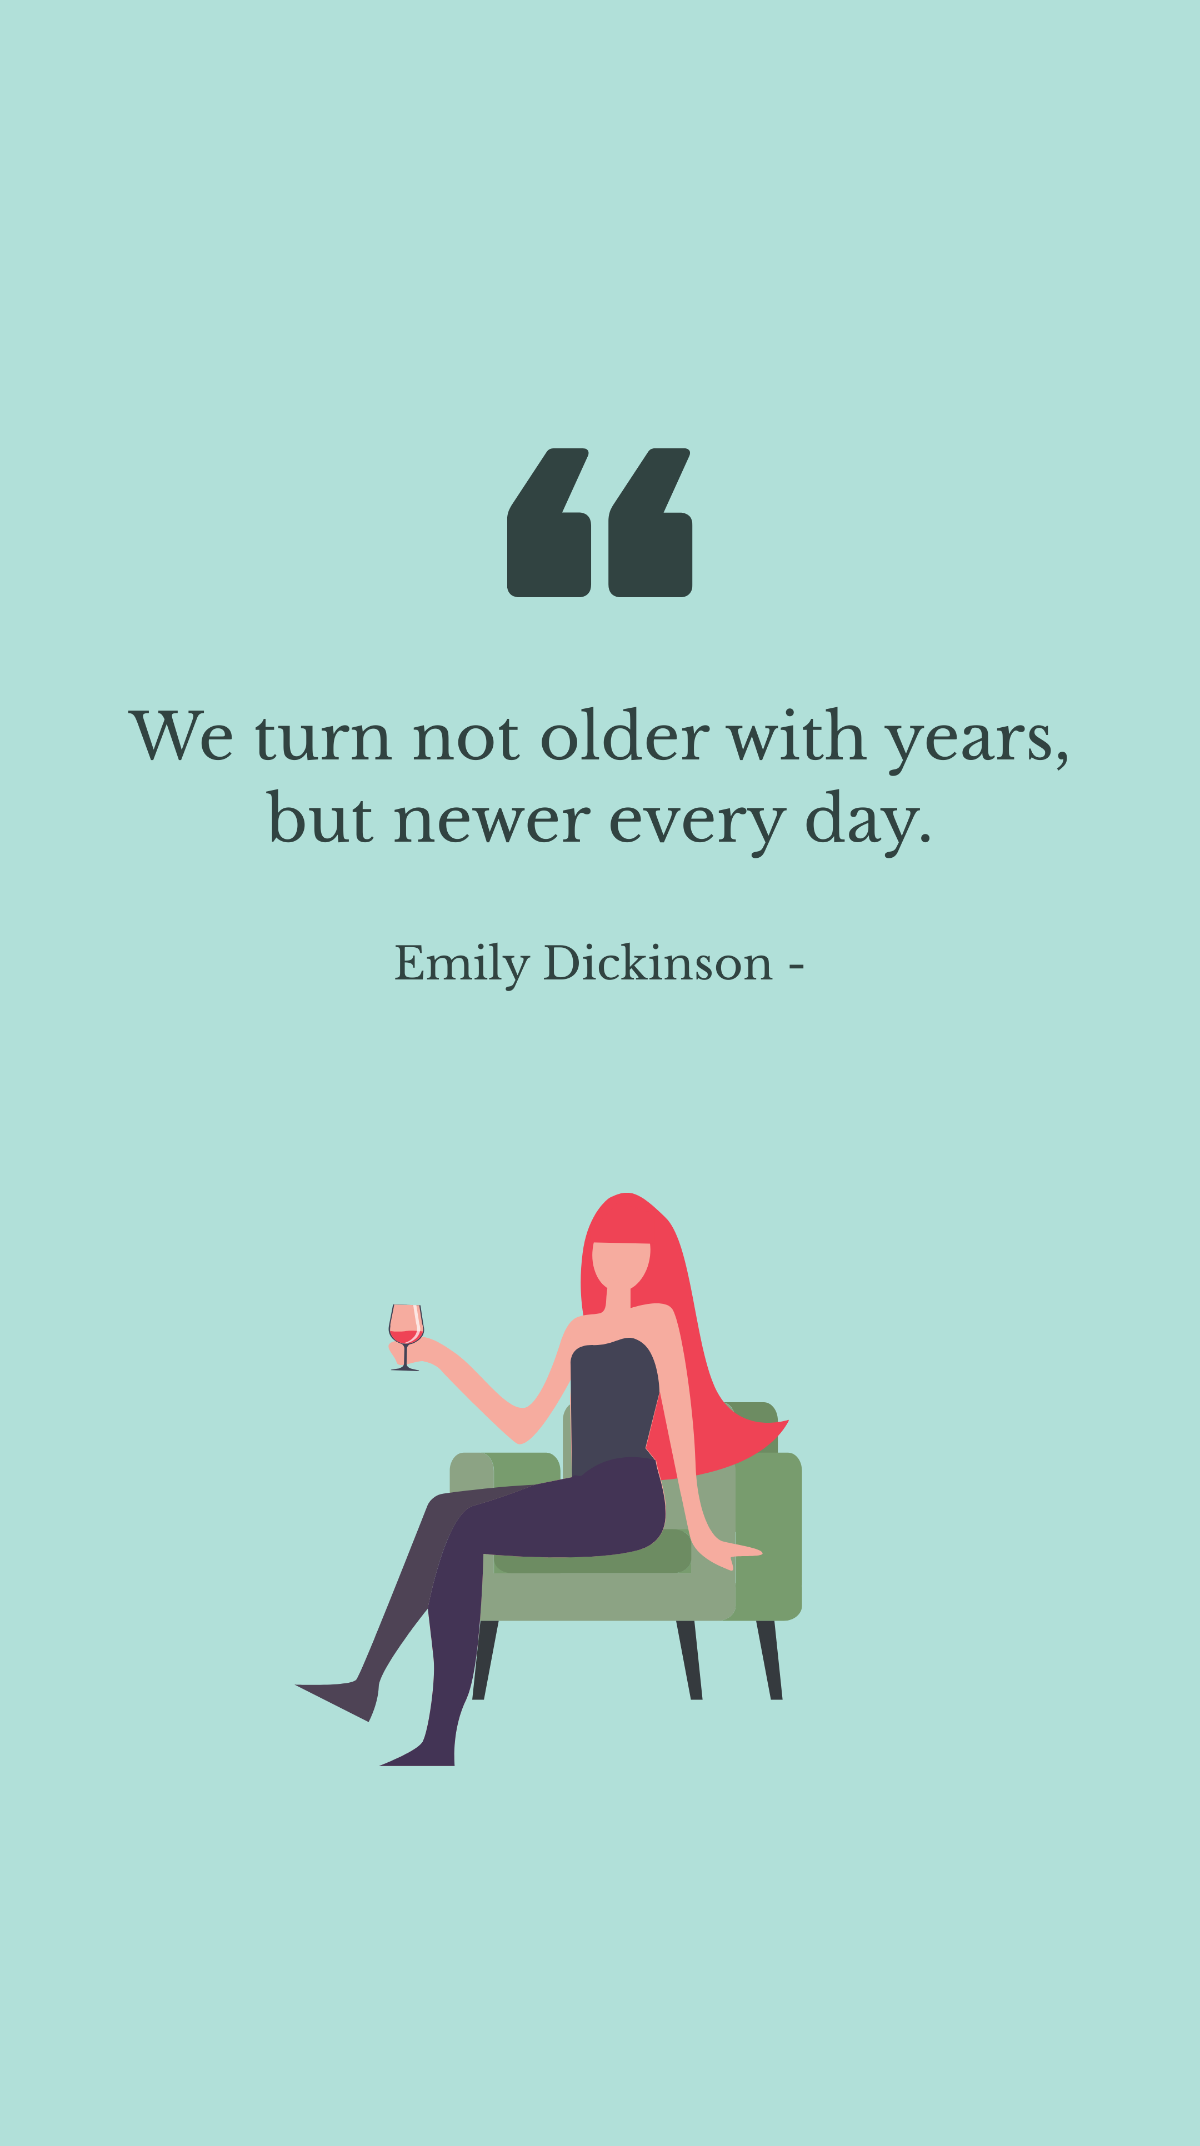 Emily Dickinson - We turn not older with years, but newer every day. Template